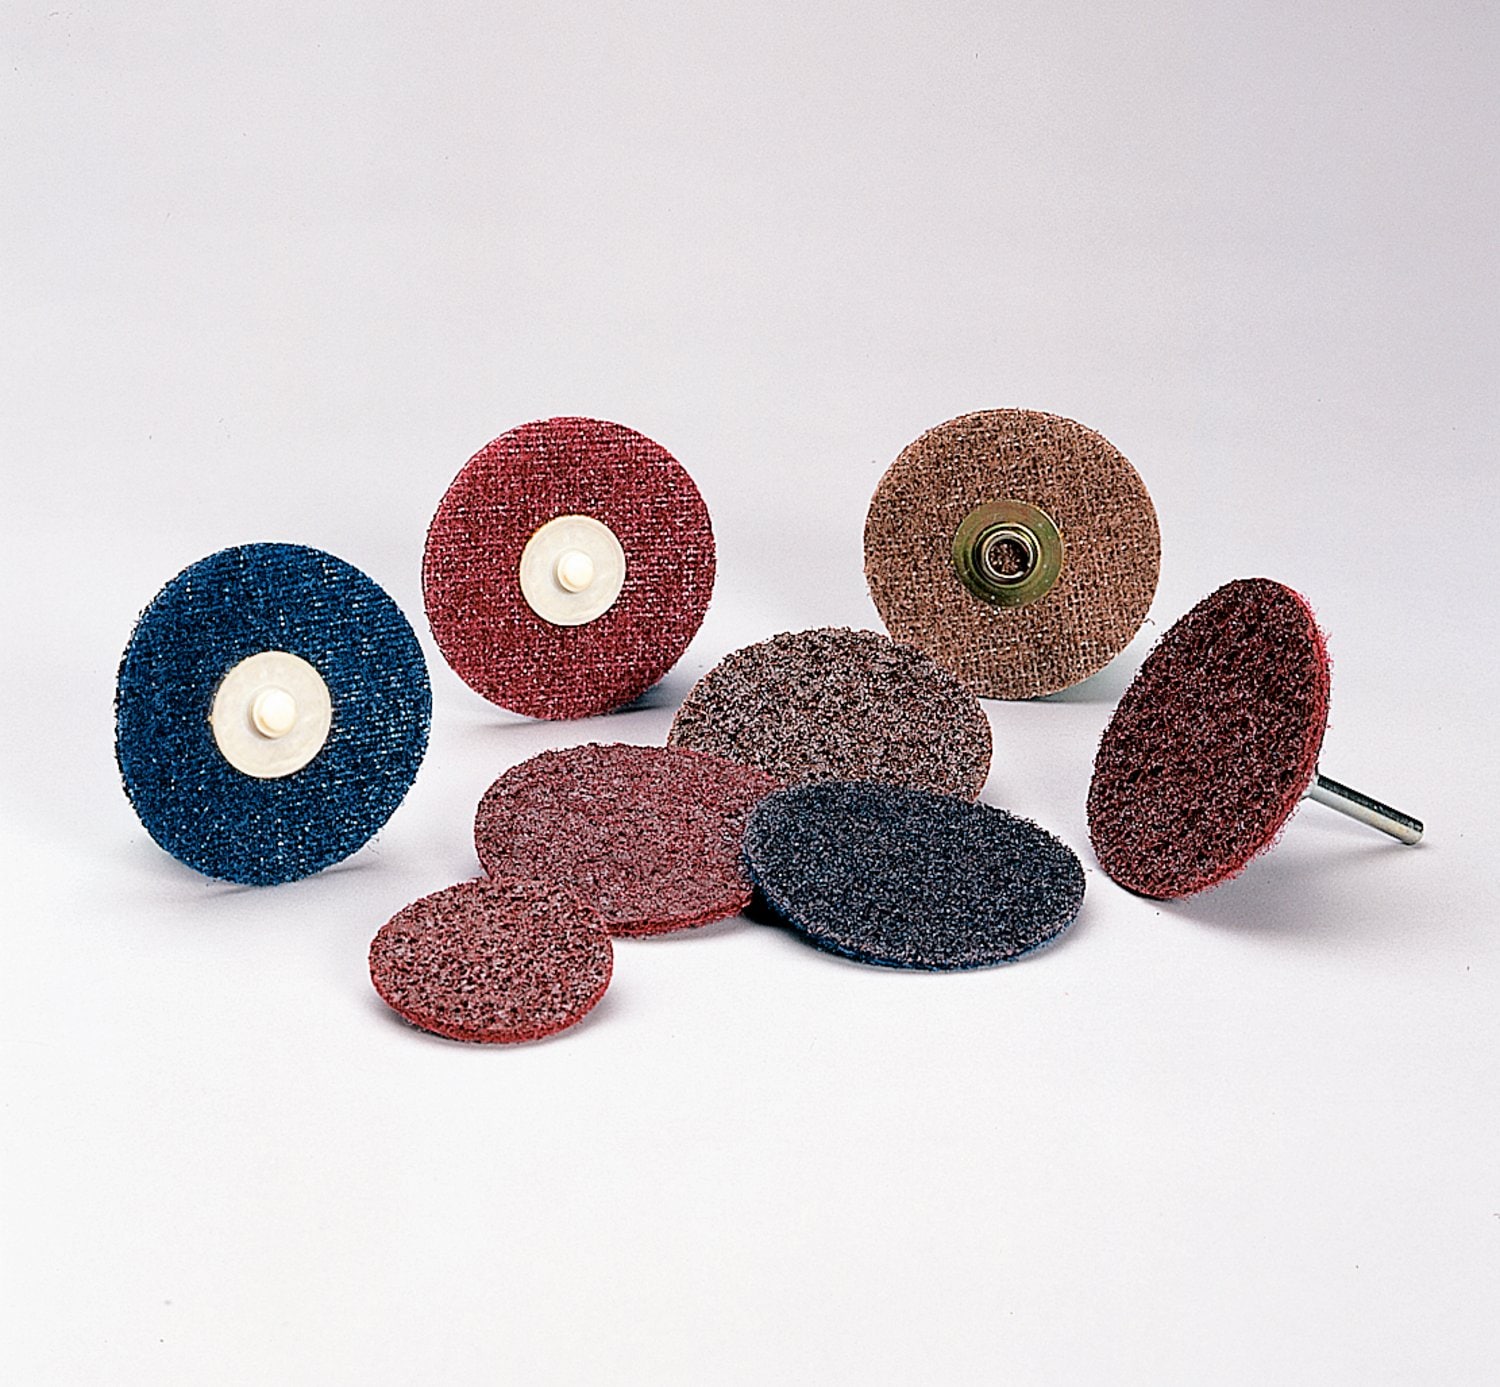 7010368493 - Standard Abrasives Surface Conditioning RC Disc, 842434, 3 in CRS,
25/Carton, 250 ea/Case